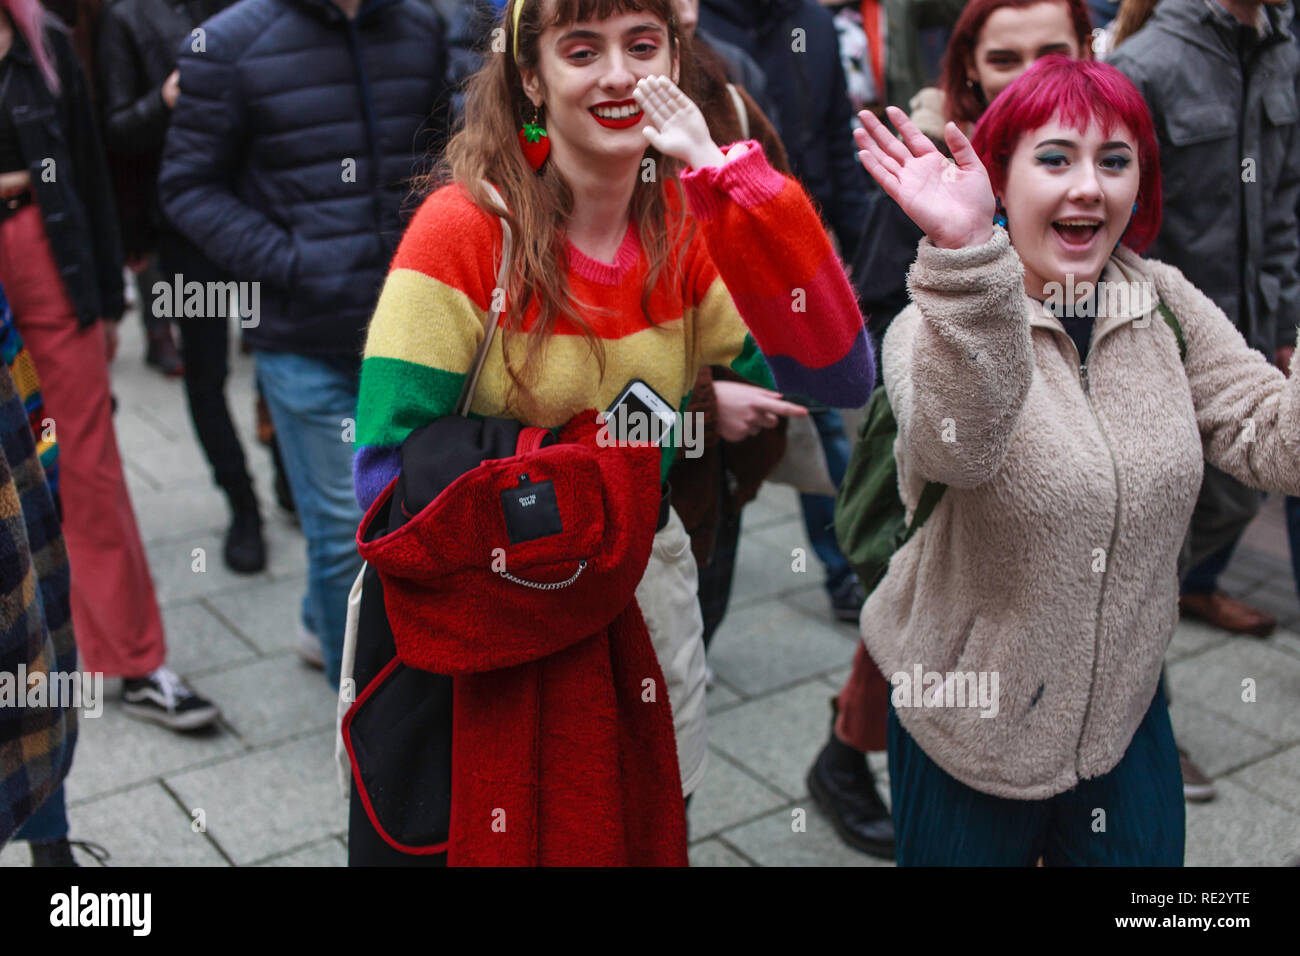 Cardiff, UK. 19th January, 2019. Save Gwdihŵ & Guildford Crescent march in Cardiff as independent music venue and small businesses close locally in the name of gentrification. Credit: Taz Rahman/Alamy Live News Stock Photo